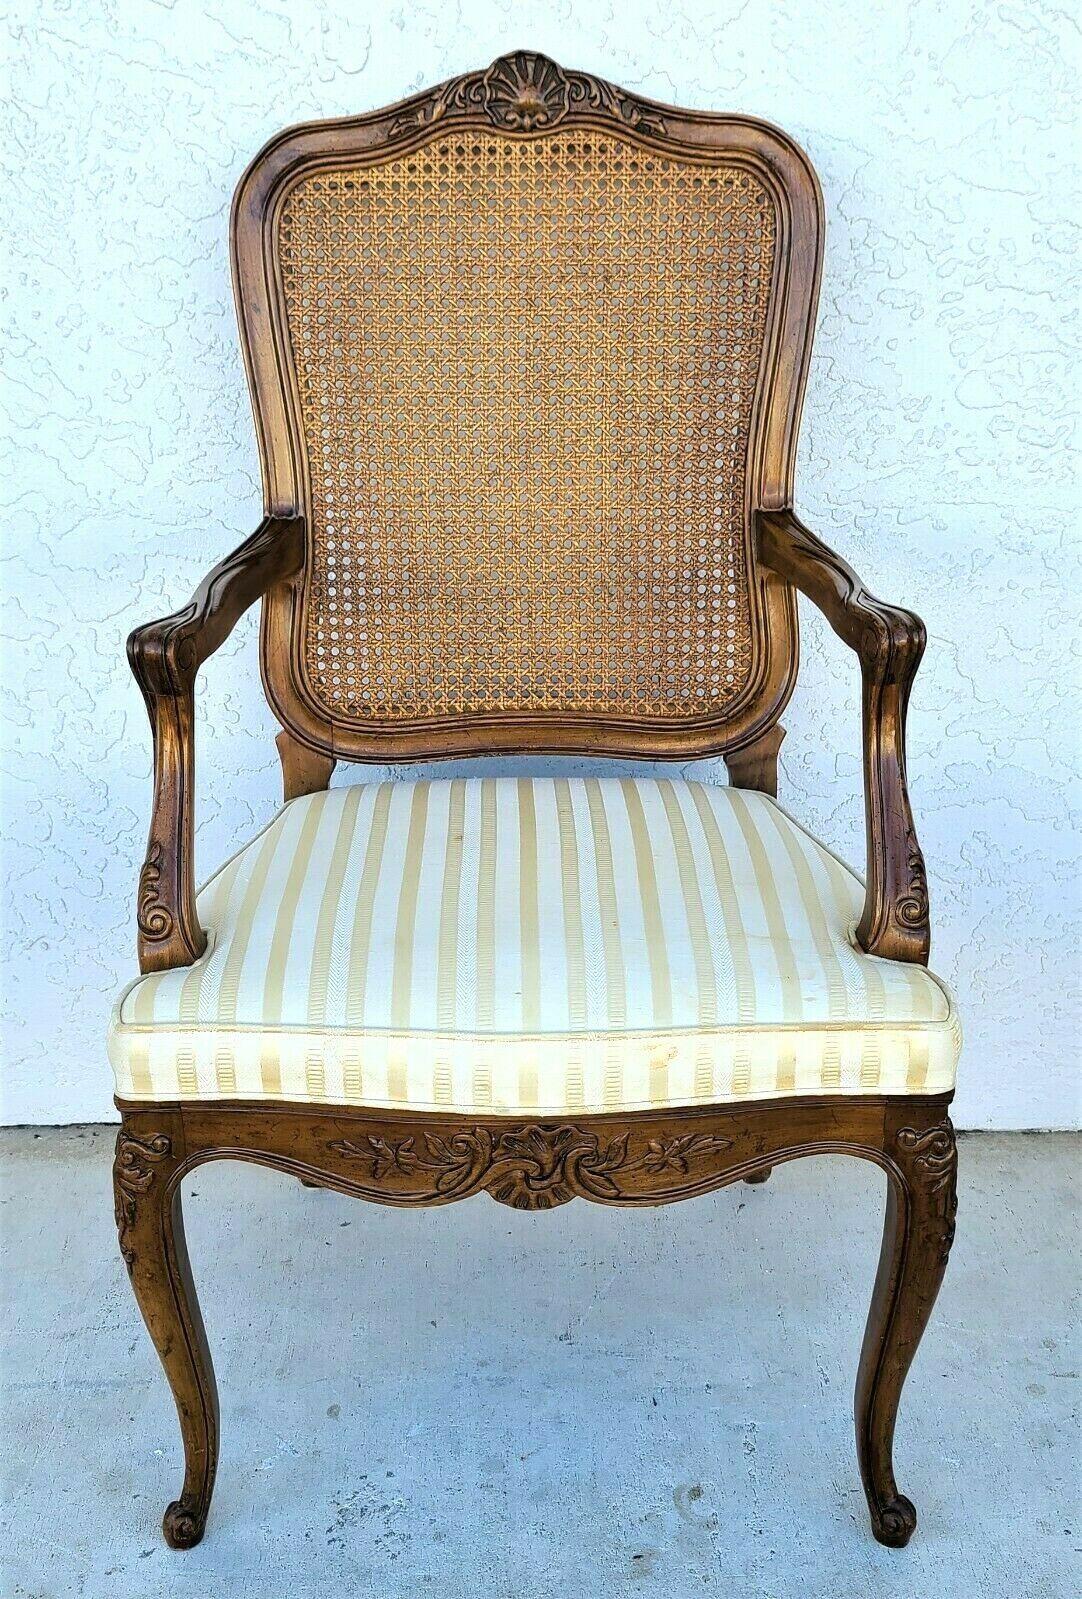 Offering one of our recent palm beach estate fine furniture acquisitions of a set of 5 vintage Henredon French provincial cane back dining chairs Model 2377
Set includes 2 arm and 3 side chairs

Approximate Measurements in Inches
Side